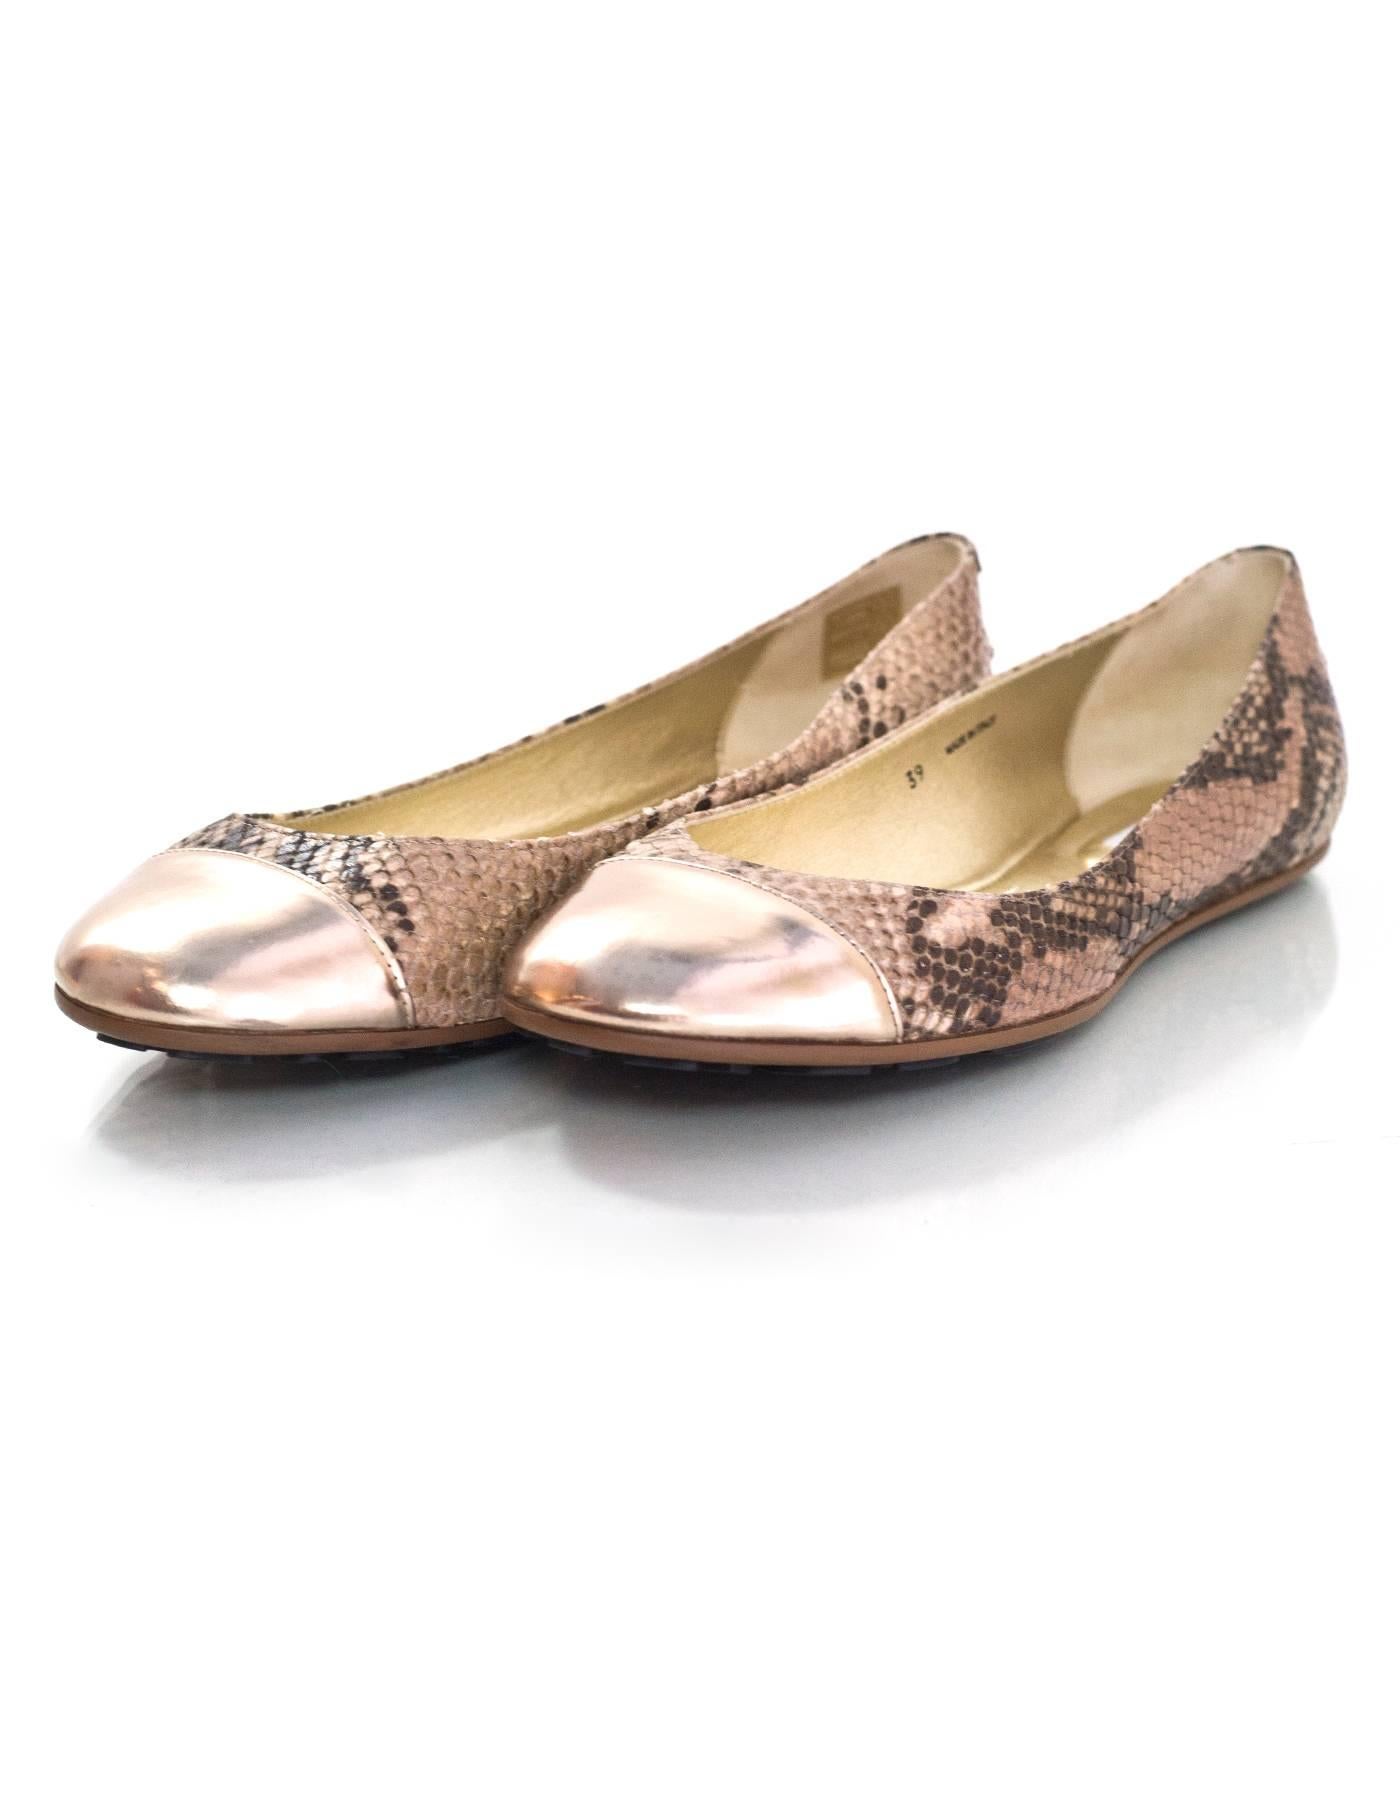 Jimmy Choo Tan Snakeskin Whirl Flats Sz 39 NEW

Made In: Italy
Color: Tan, gold
Materials: Embossed leather
Closure/Opening: Slide on
Sole Stamp: Jimmy Choo London Made in Italy 39
Overall Condition: Excellent pre-owned condition - new
Included: